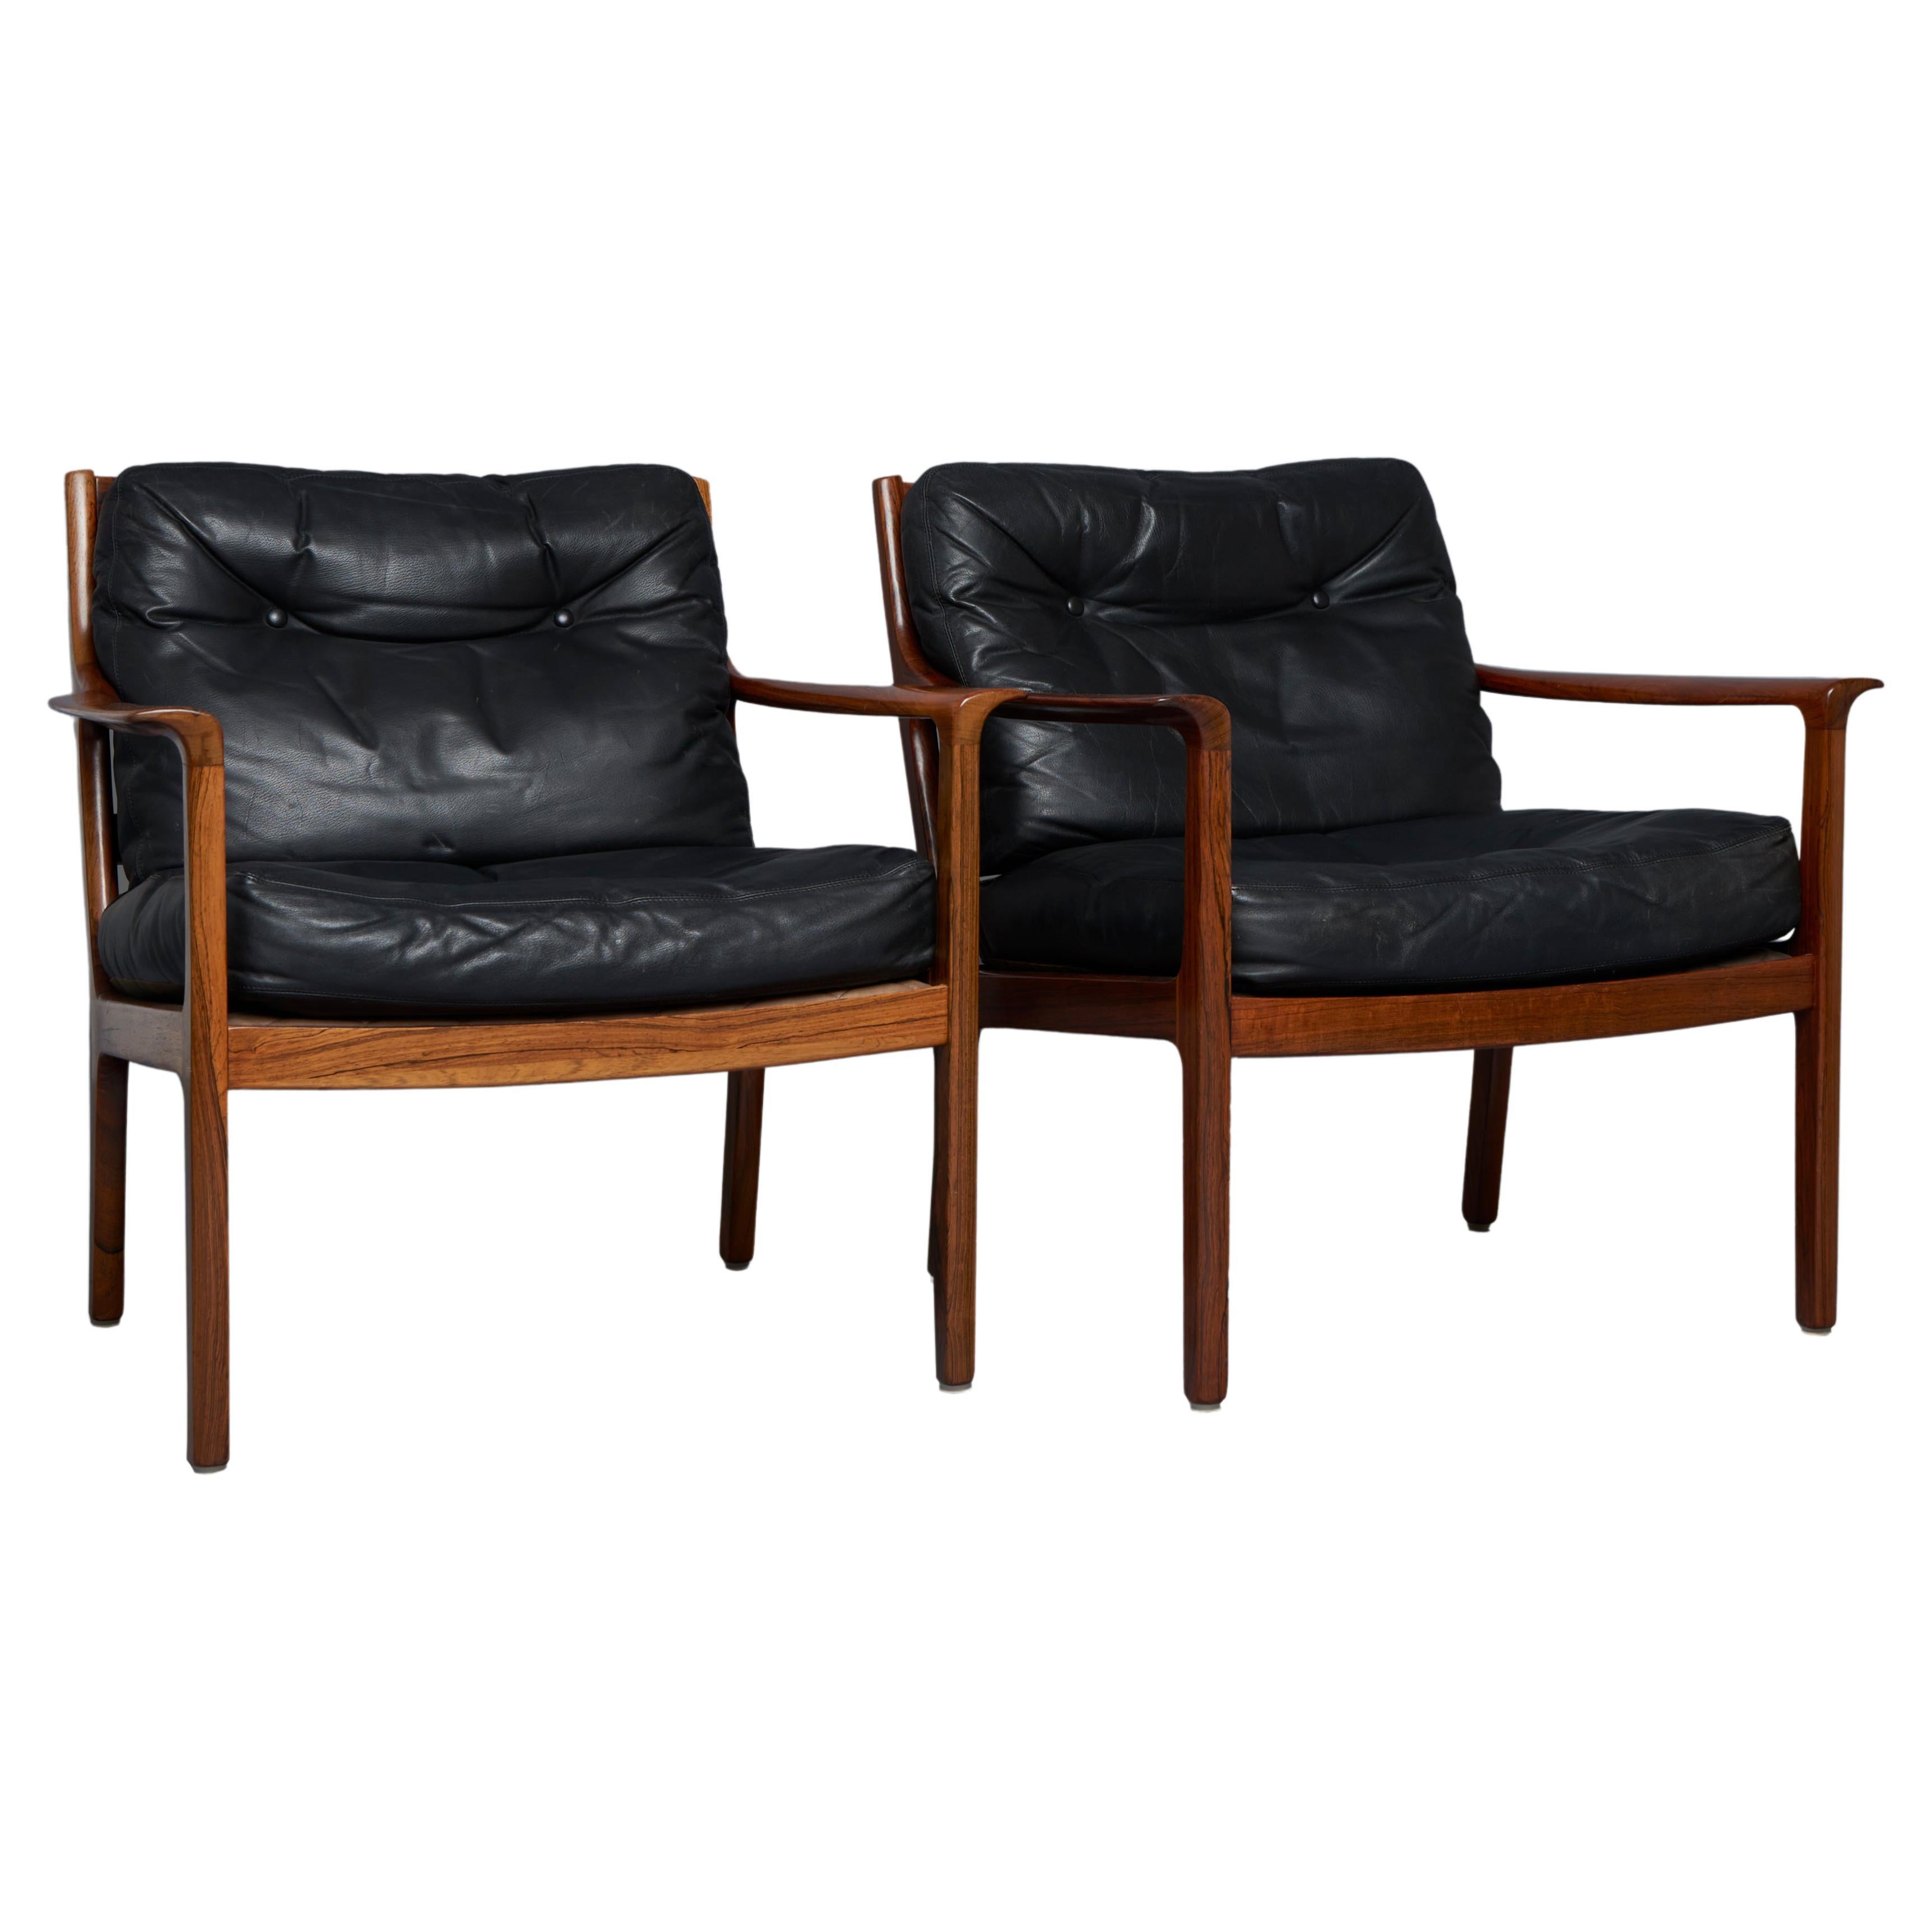 1960'S Ole Wanscher Pair of Easy Chairs in Leather and Rosewood